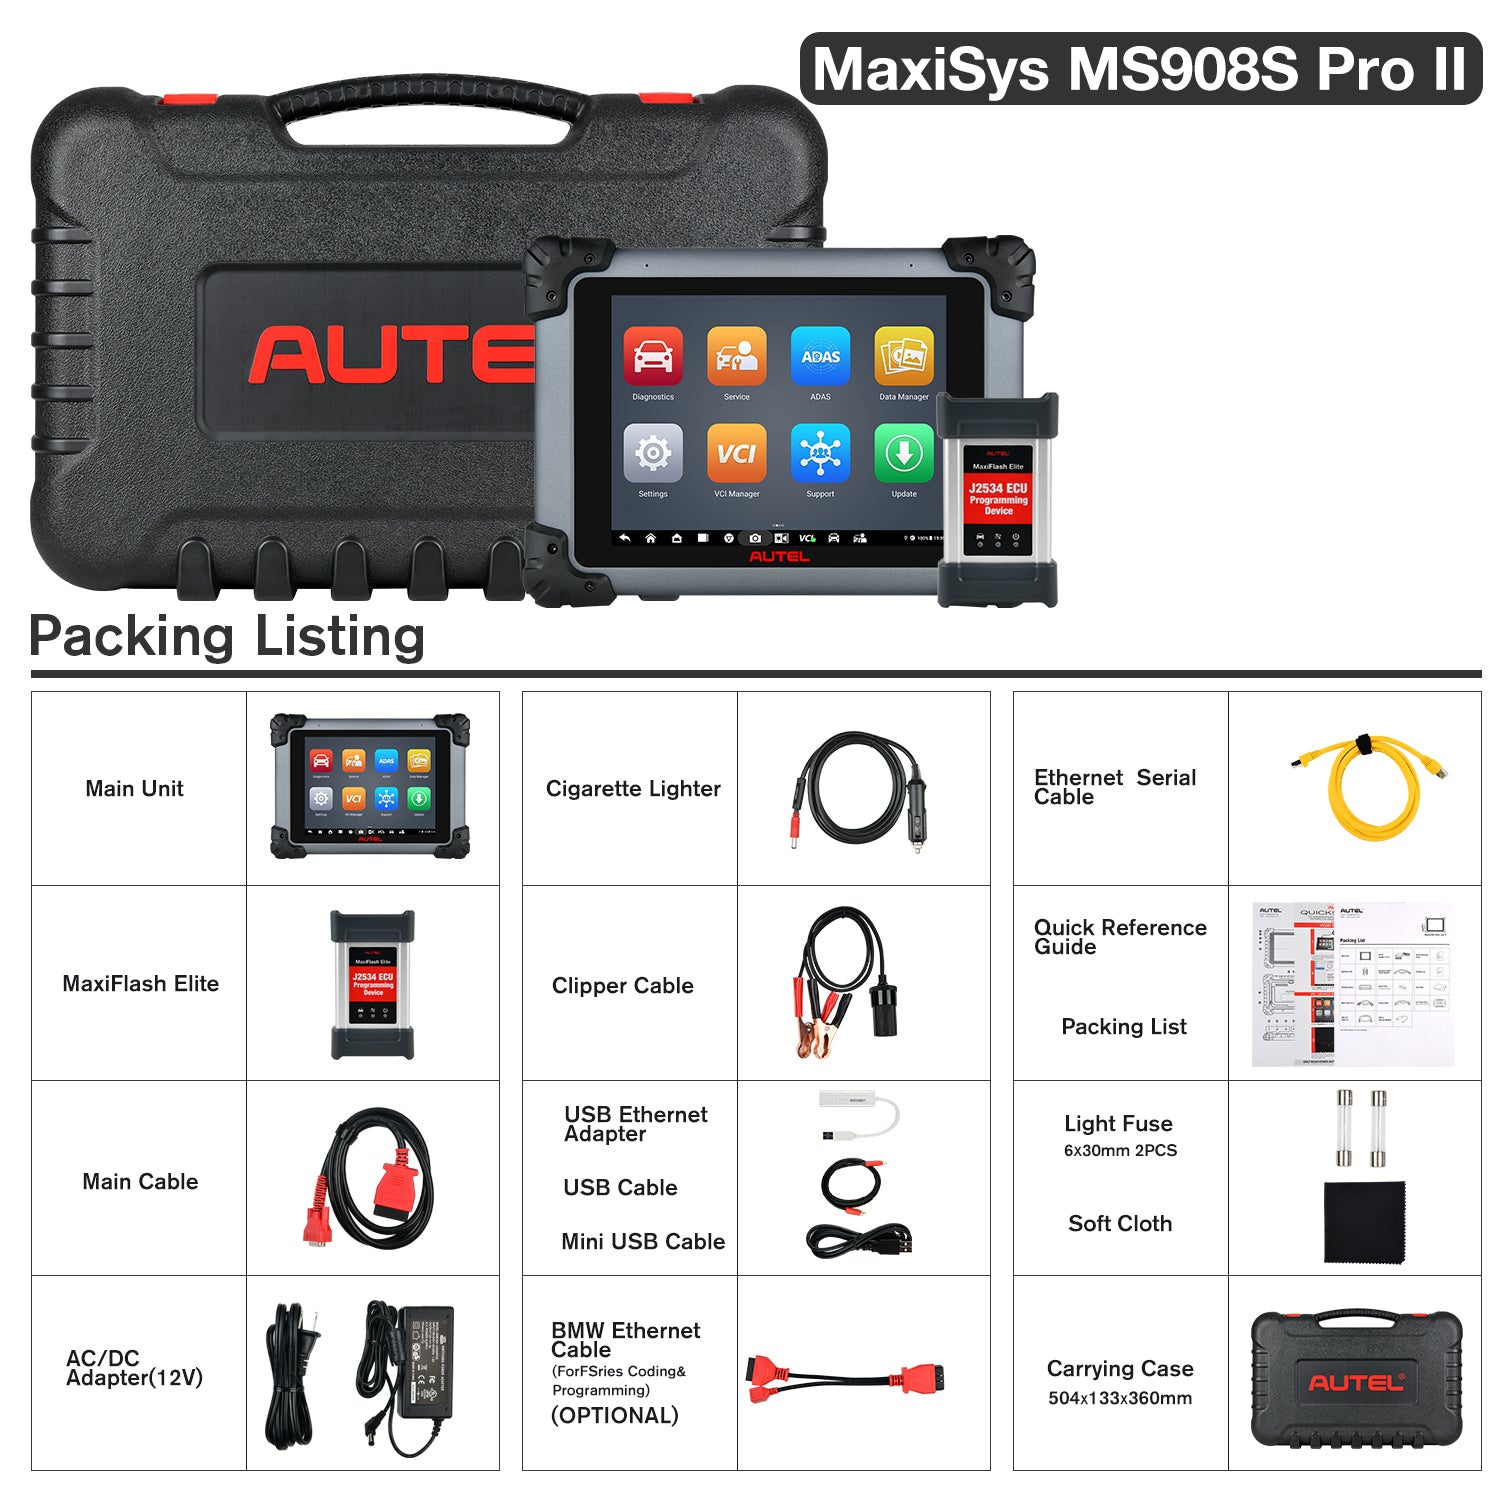 ms908s pro ii package listing